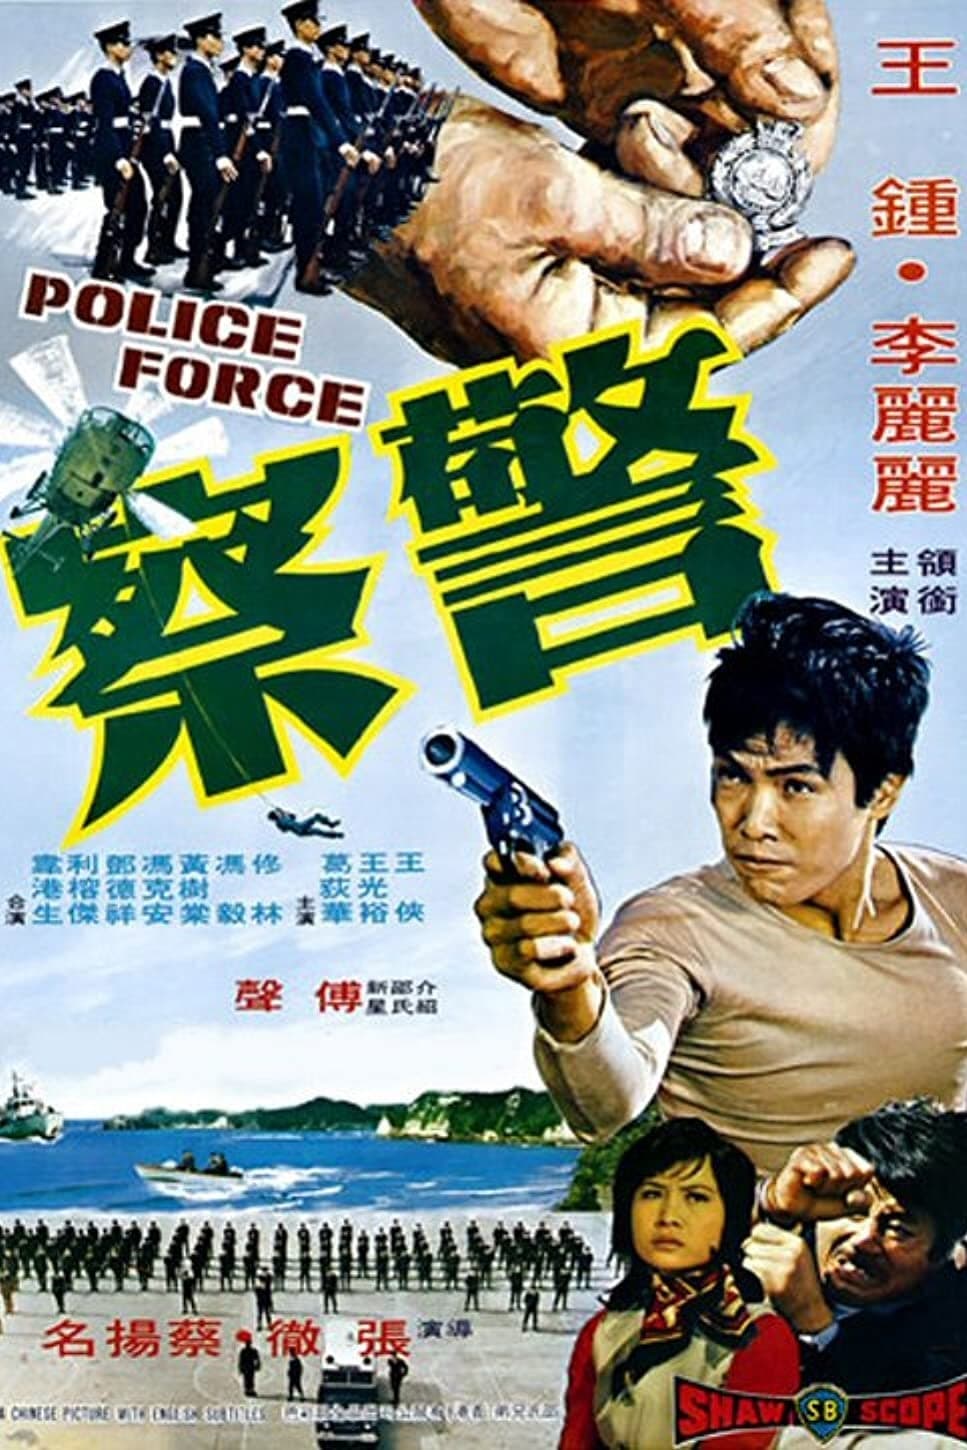 Police Force